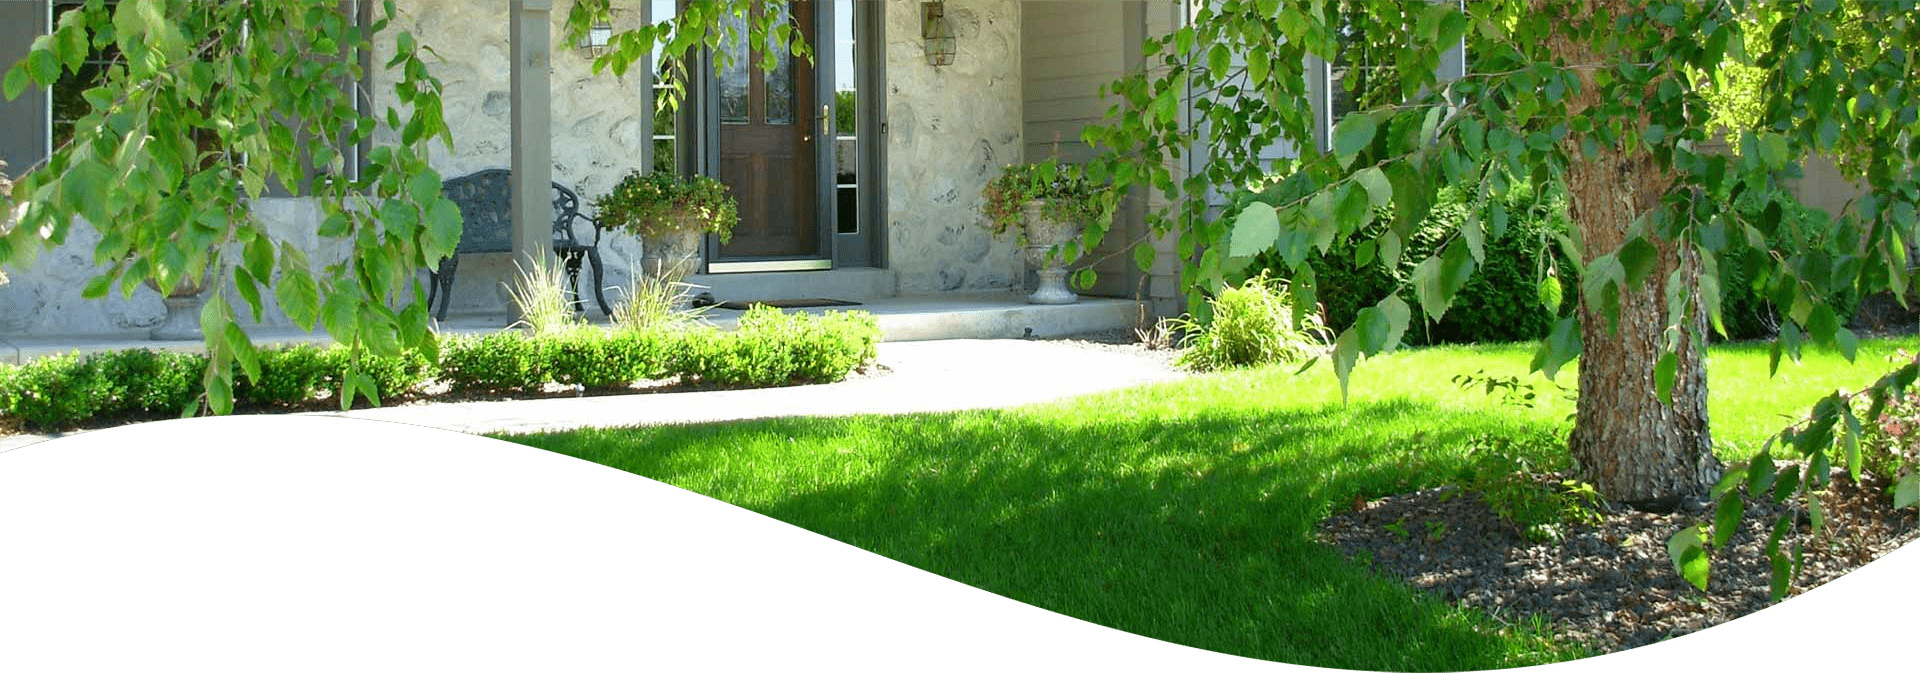 This image shows a well-manicured lawn with trees in front of a stone facade house featuring a dark wood door and wall-mounted lanterns.